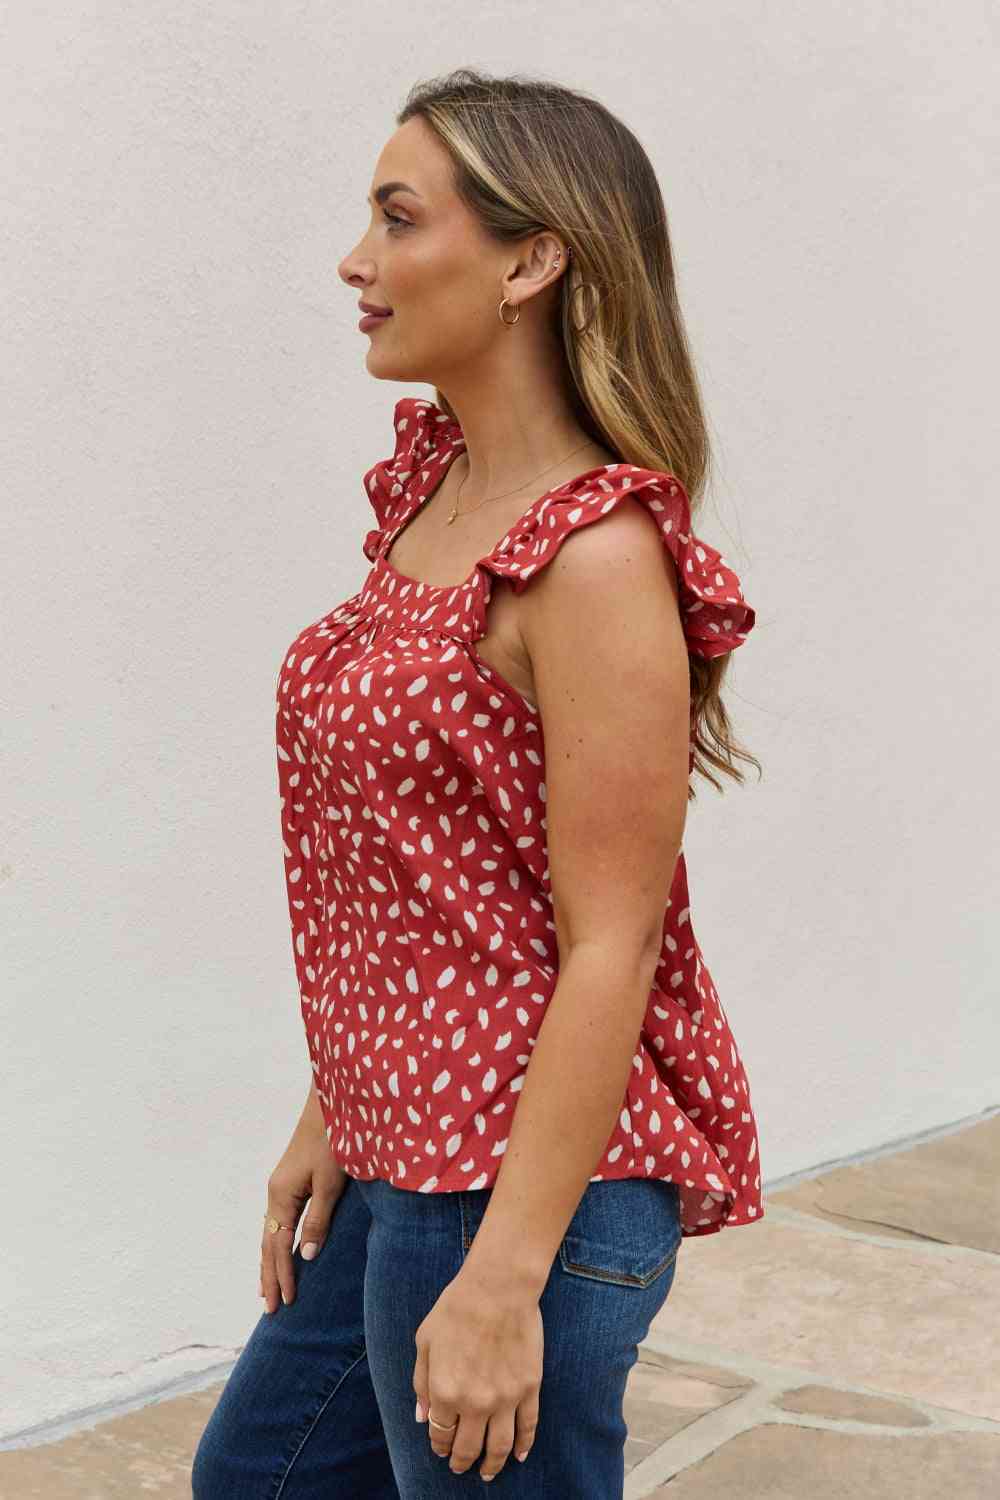 Woven Top in Brick - Camis & Tops - Shirts & Tops - 9 - 2024